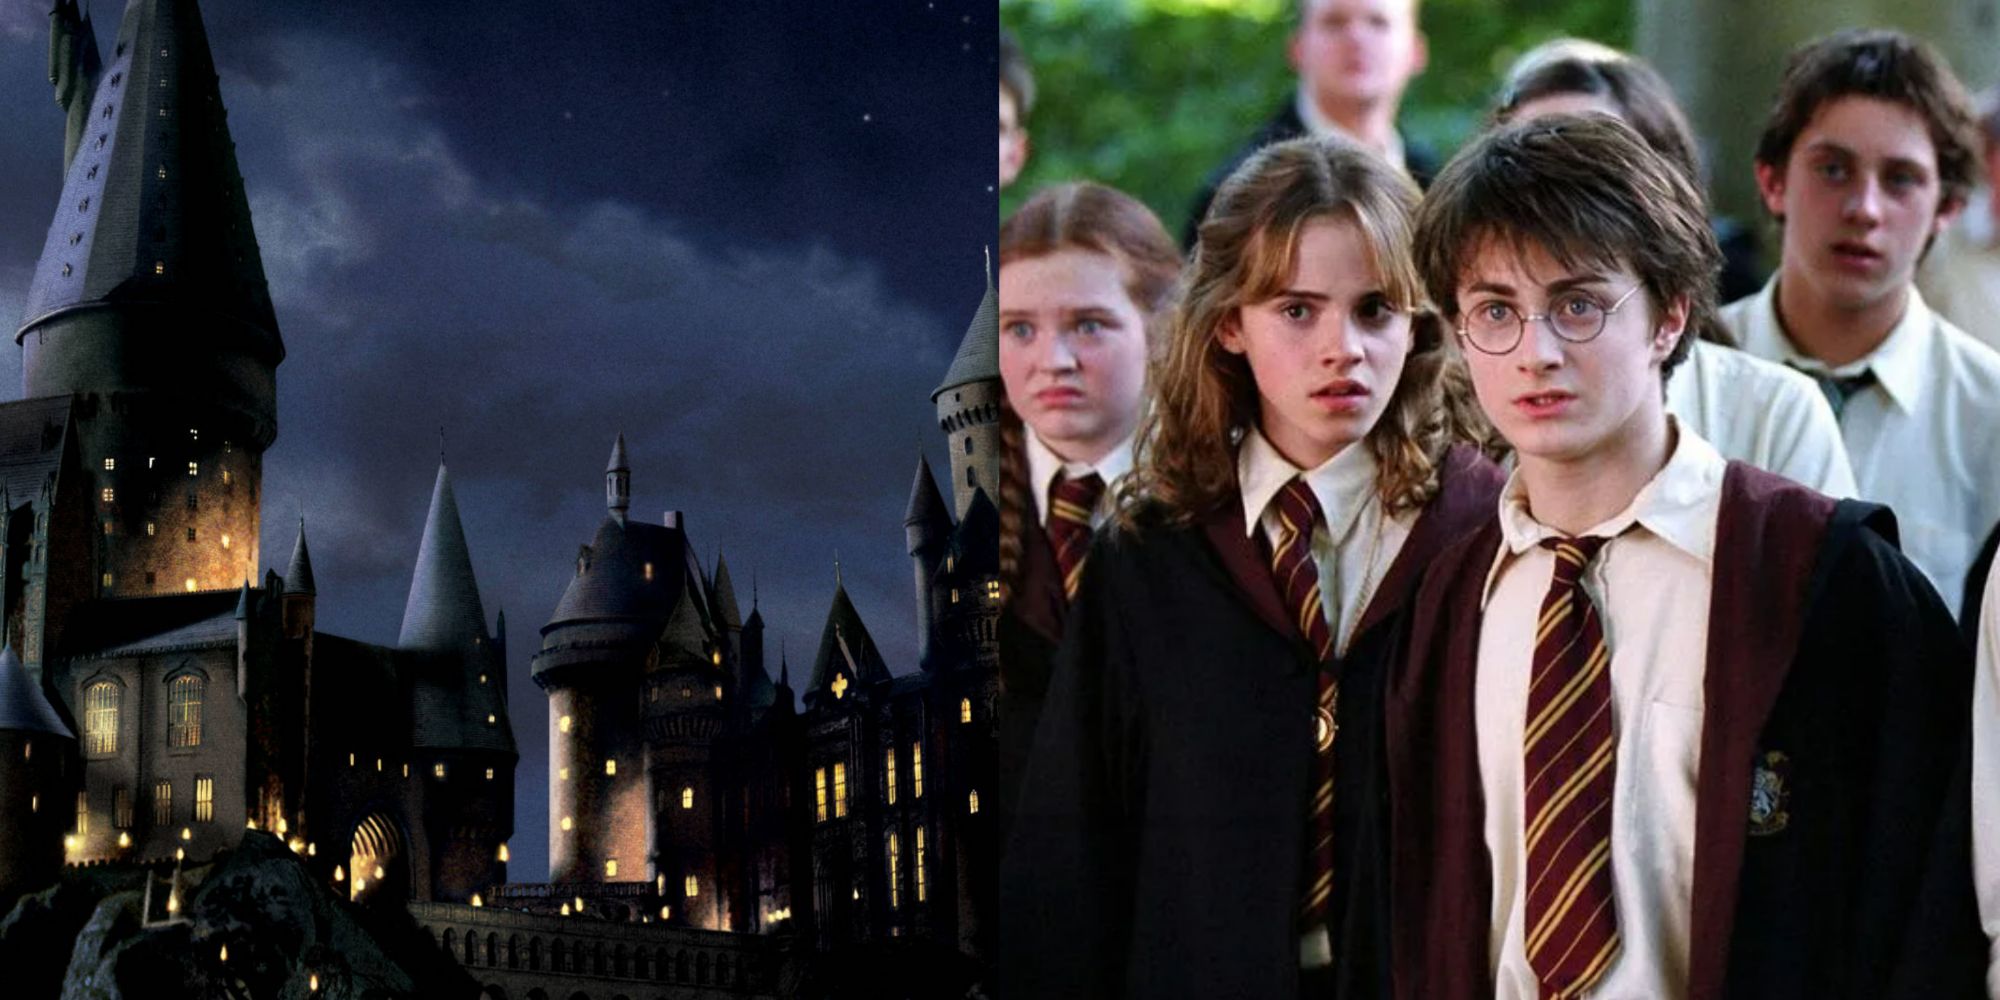 A split image showing Hogwarts Castle on the left and Hogwarts students on the right from Harry Potter. 